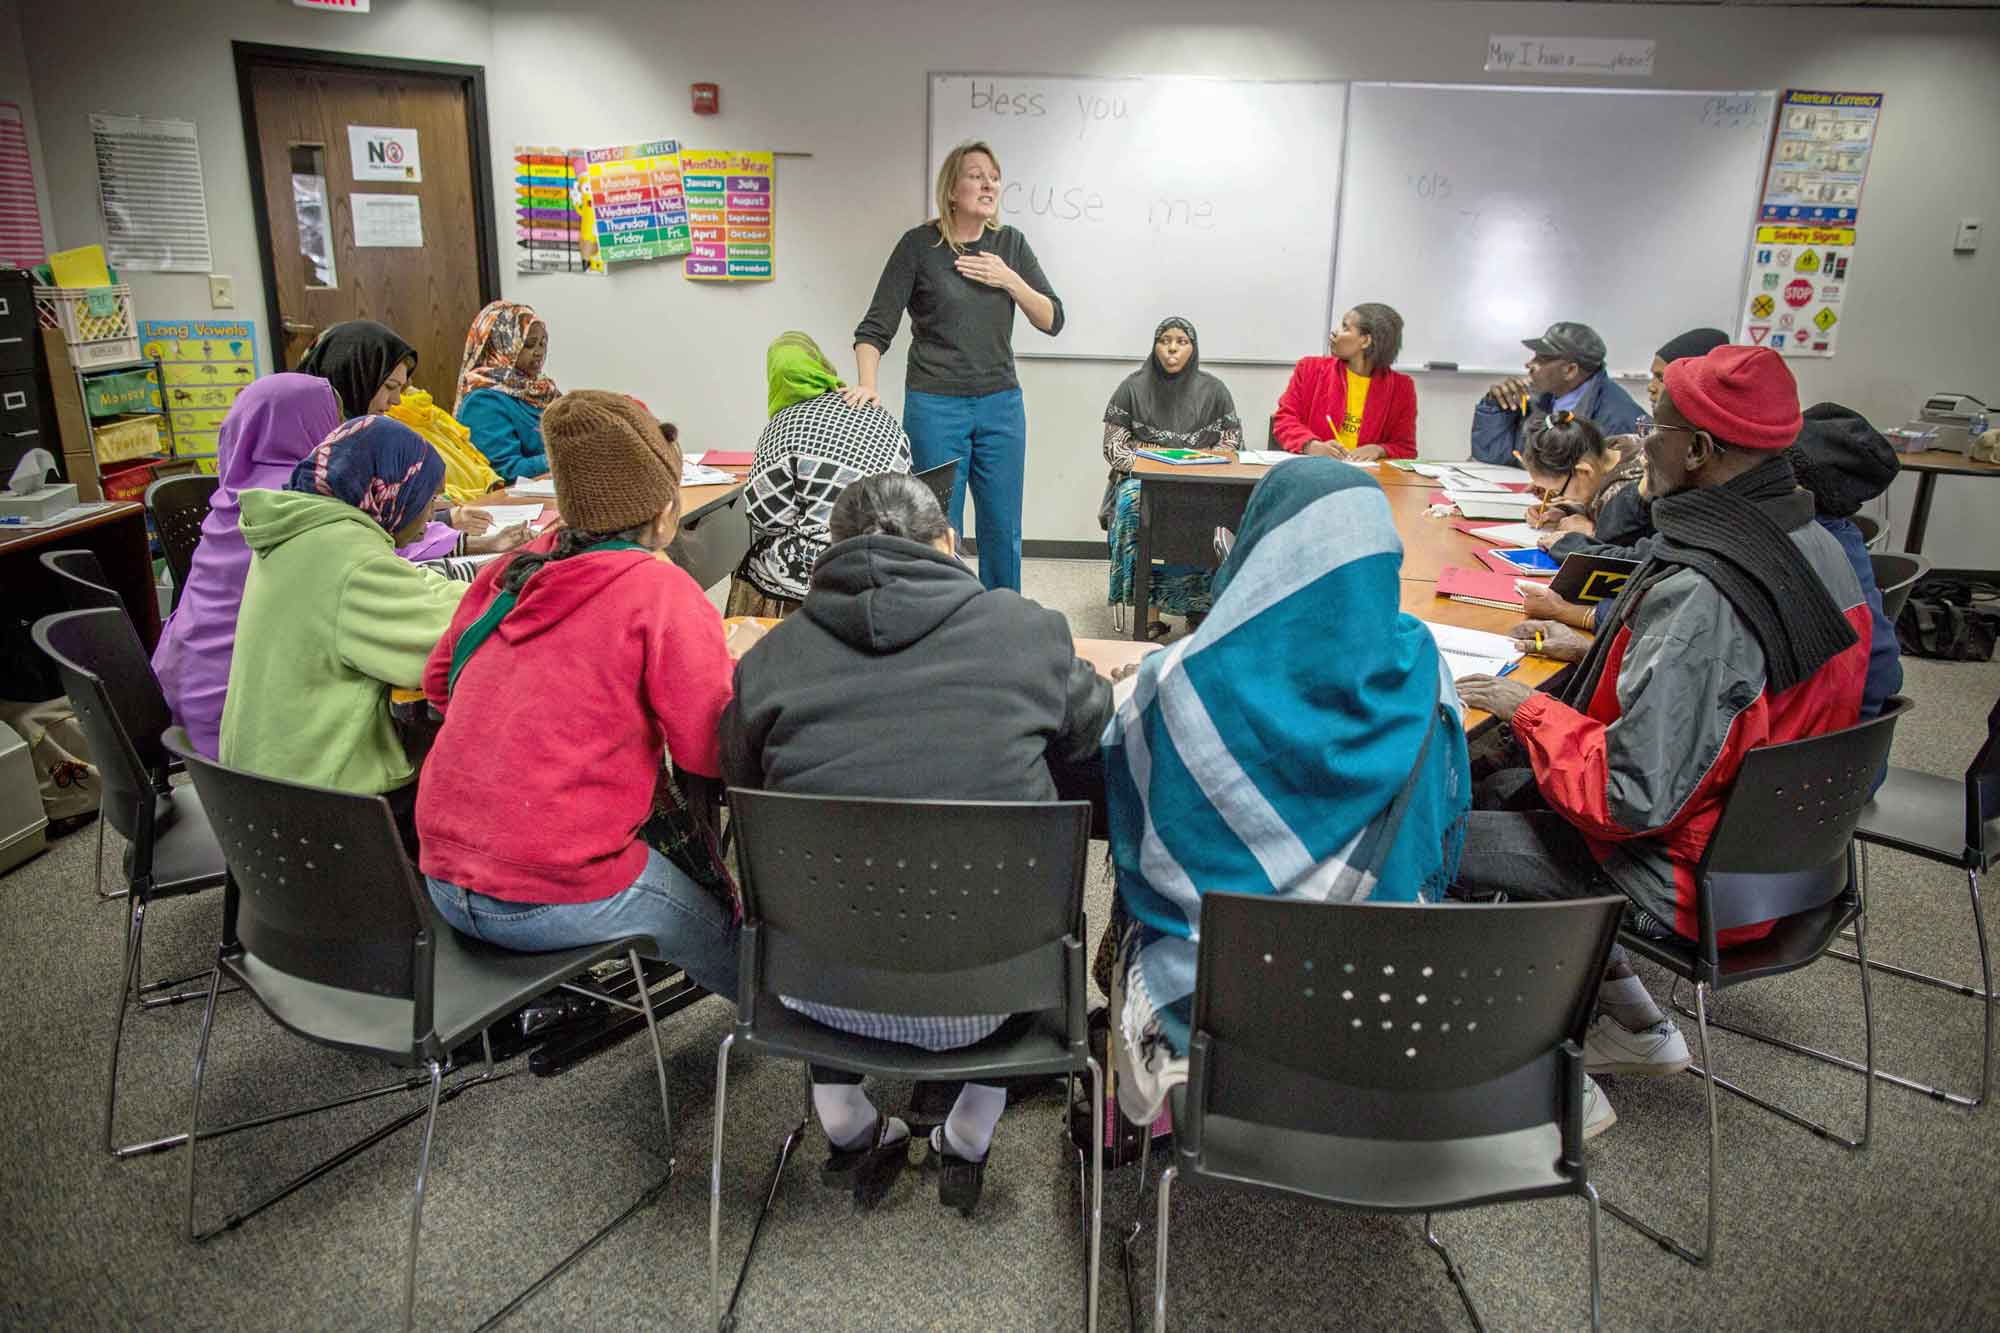 A cultural orientation trainer teaching a class of recently resettled refugees about U.S. cultural norms